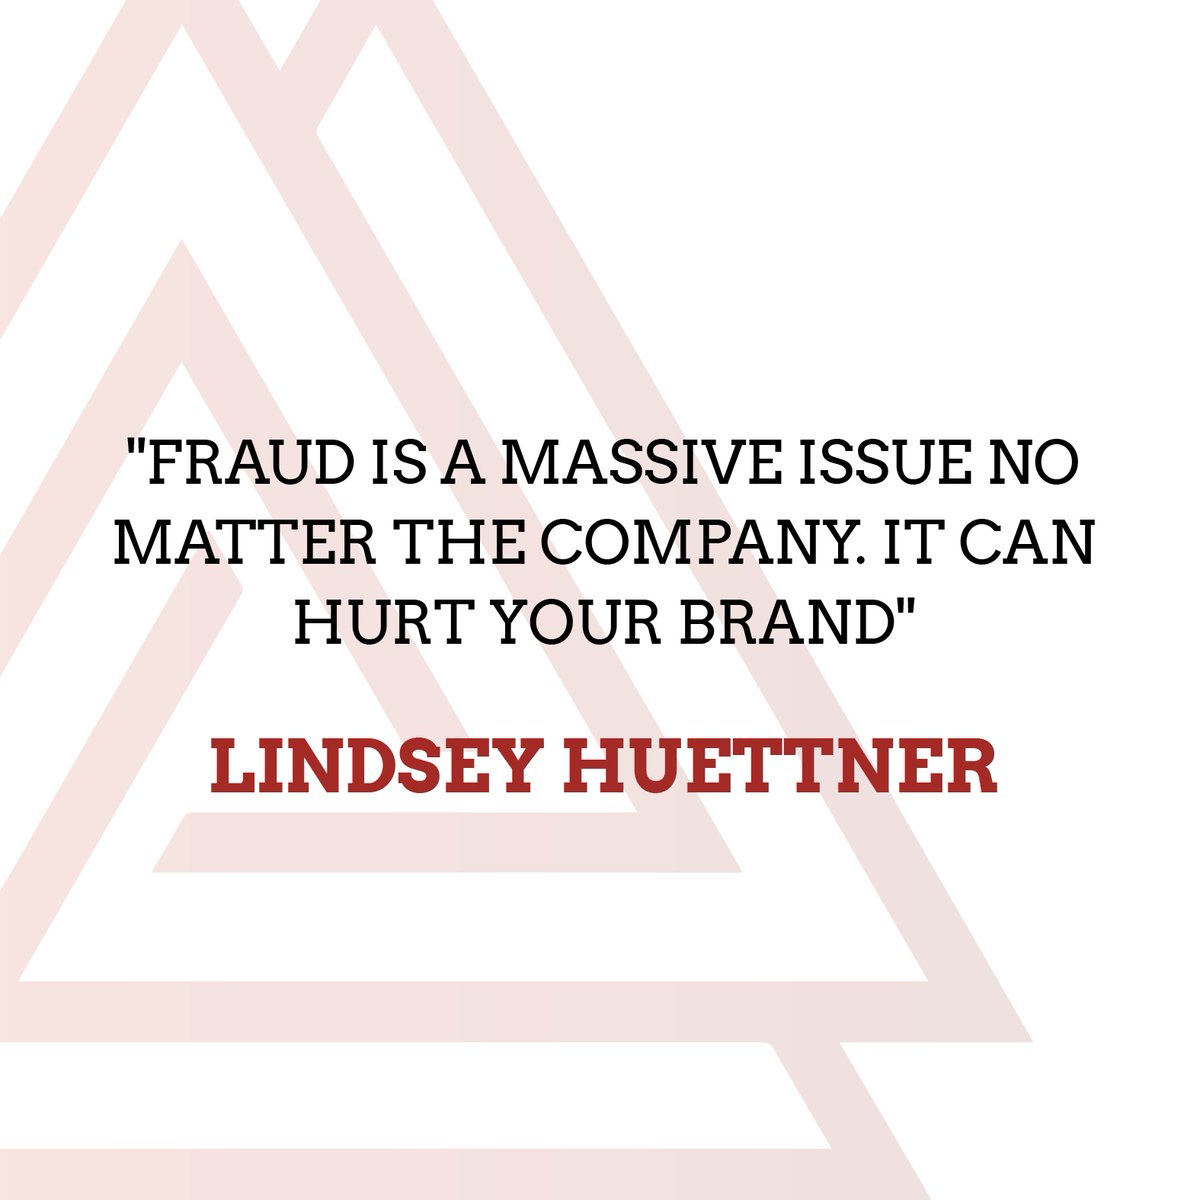 Let's turn fraud-fighting into a company-wide adventure! Protecting your brand is our mission, and we do it with a smile. 😊

Join us in the battle for brand integrity! 

#BrandGuardians #FraudFighters #ProtectYourBrand #TeamworkMakesTheDreamWork #NoFraudAllowed